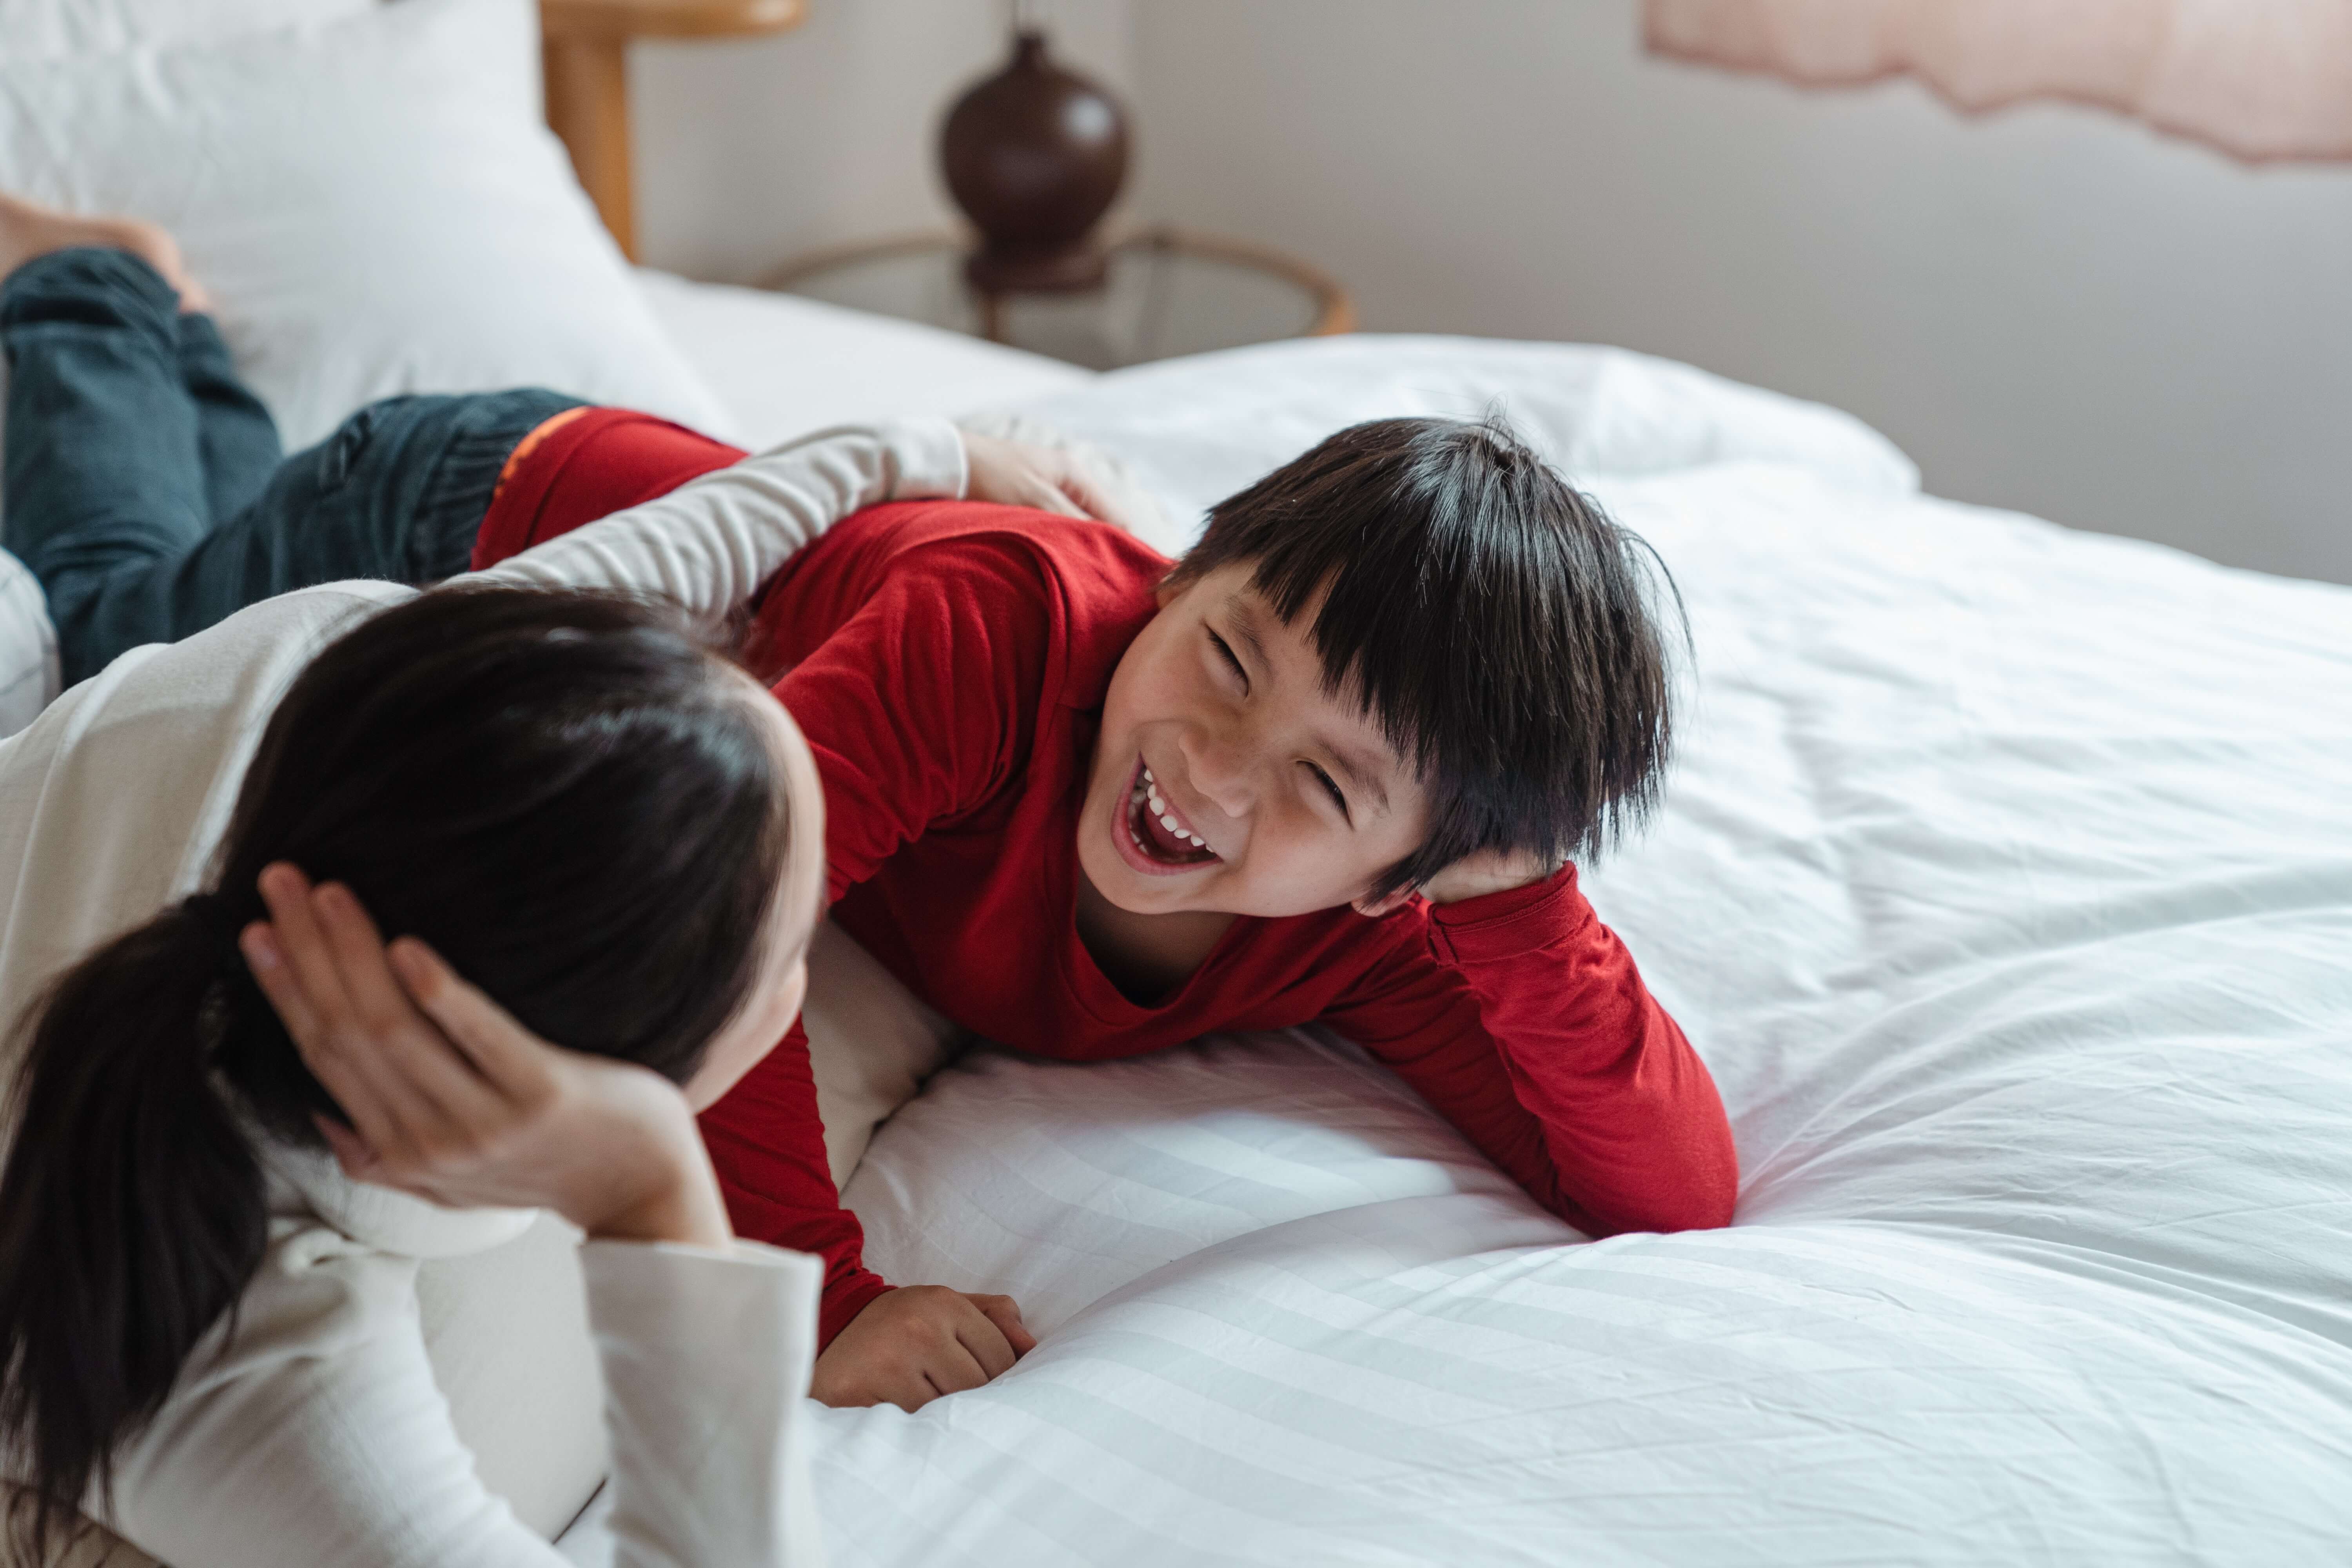 What Should I Do When My Child is Being Aggressive?